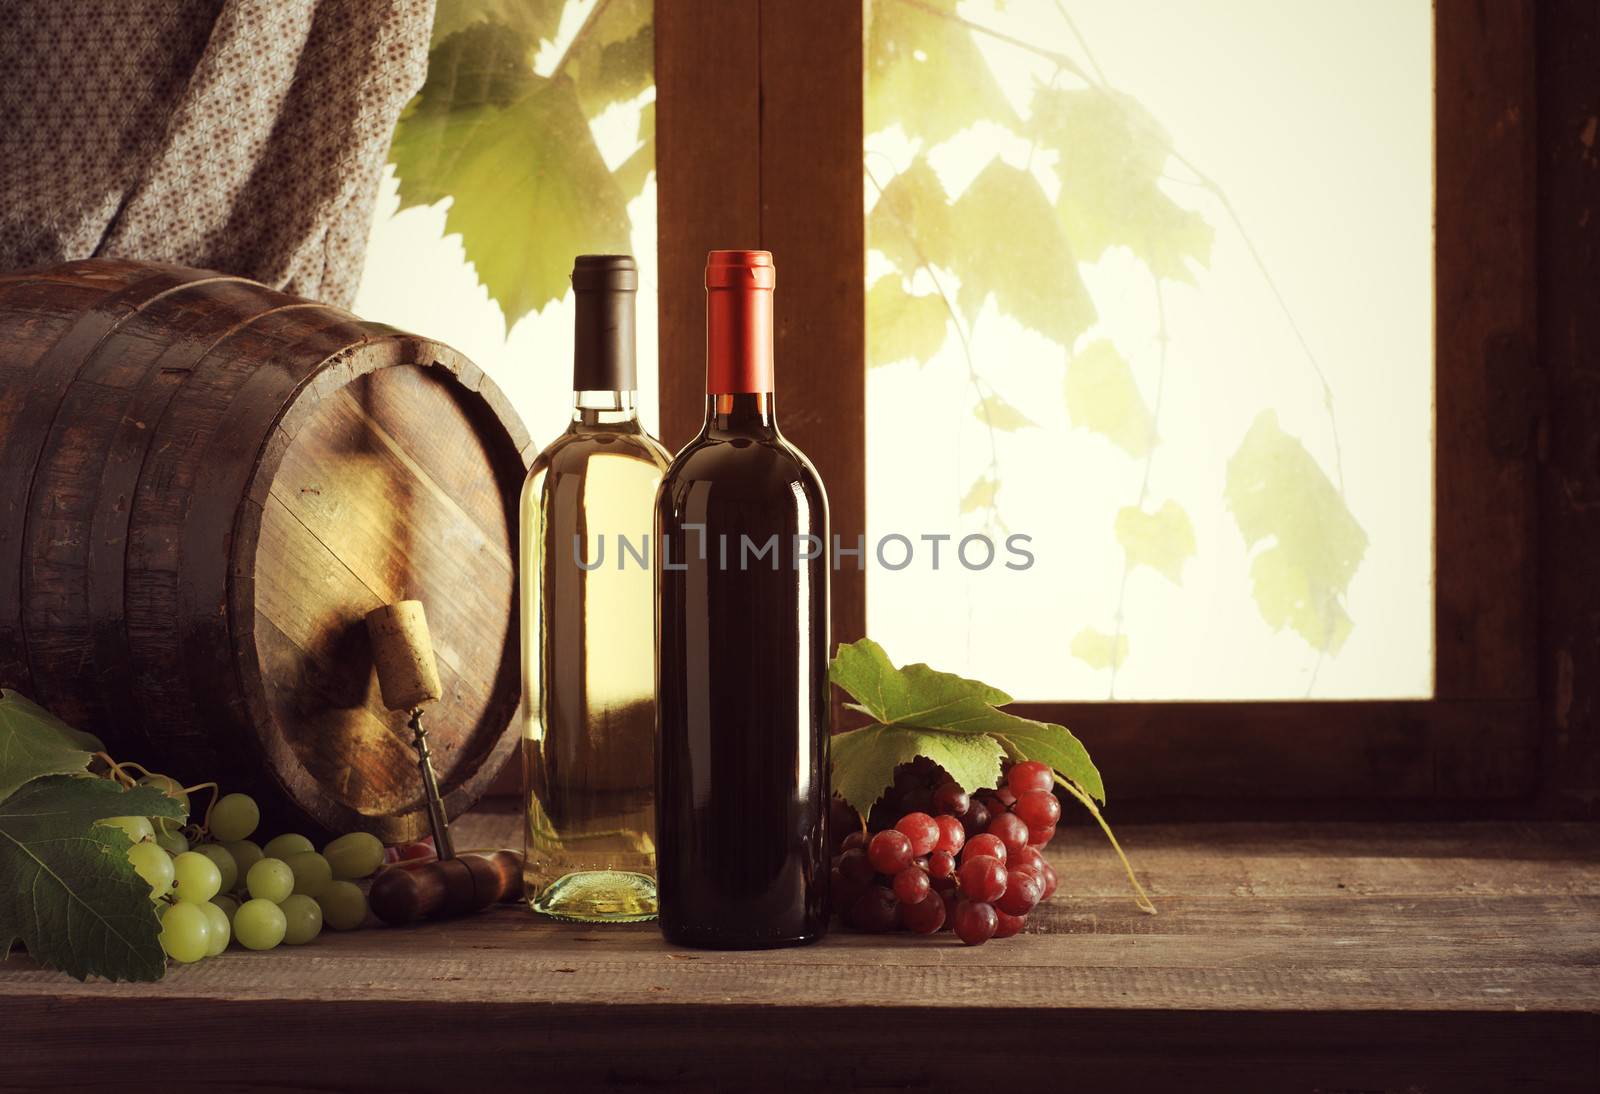 Wine bottles with grapes and barrel on old wooden table